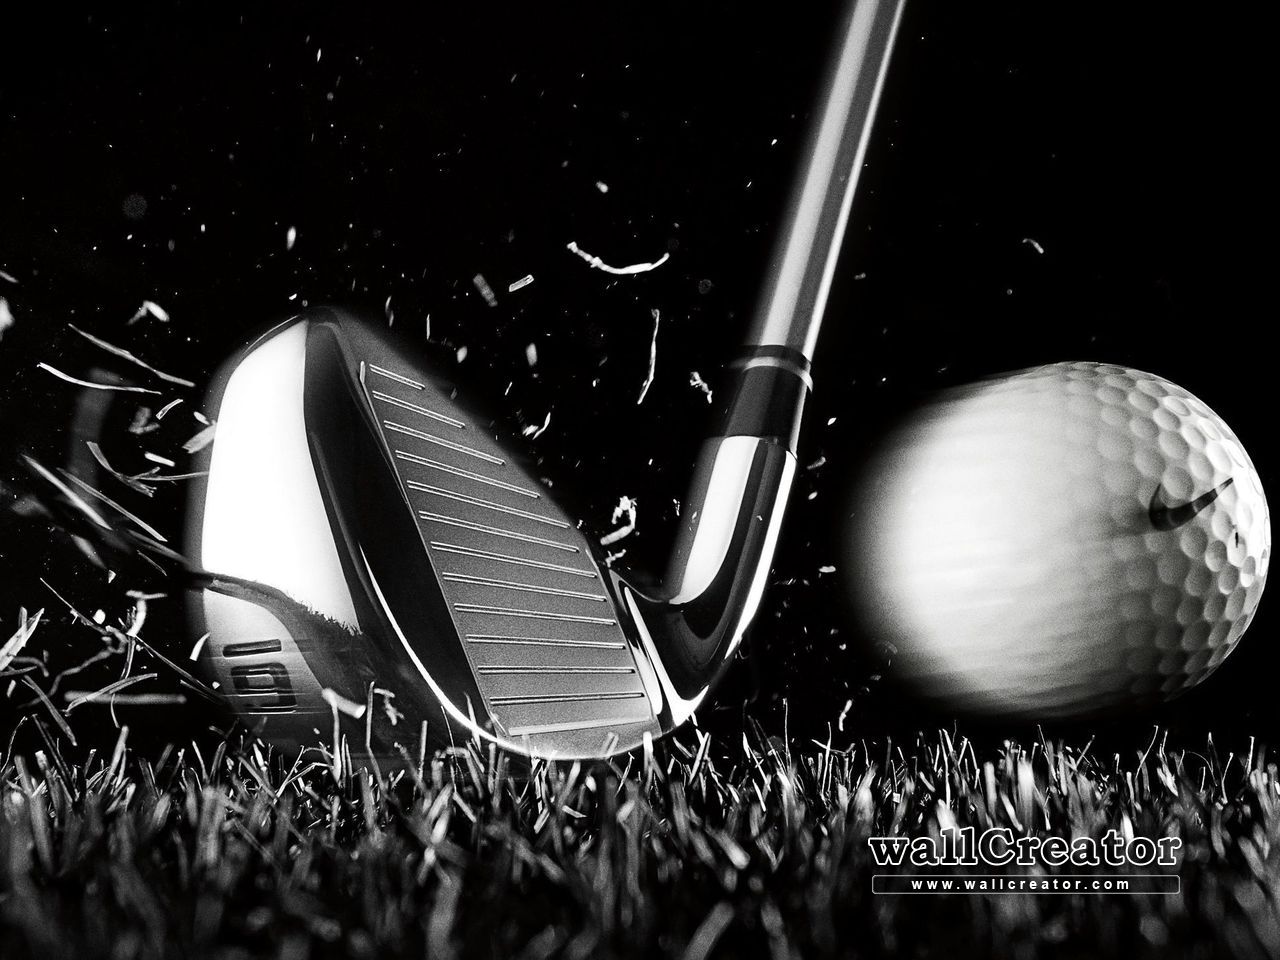 Nike Golf Wallpapers 1937 Hd Wallpapers in Sports   Imagescicom